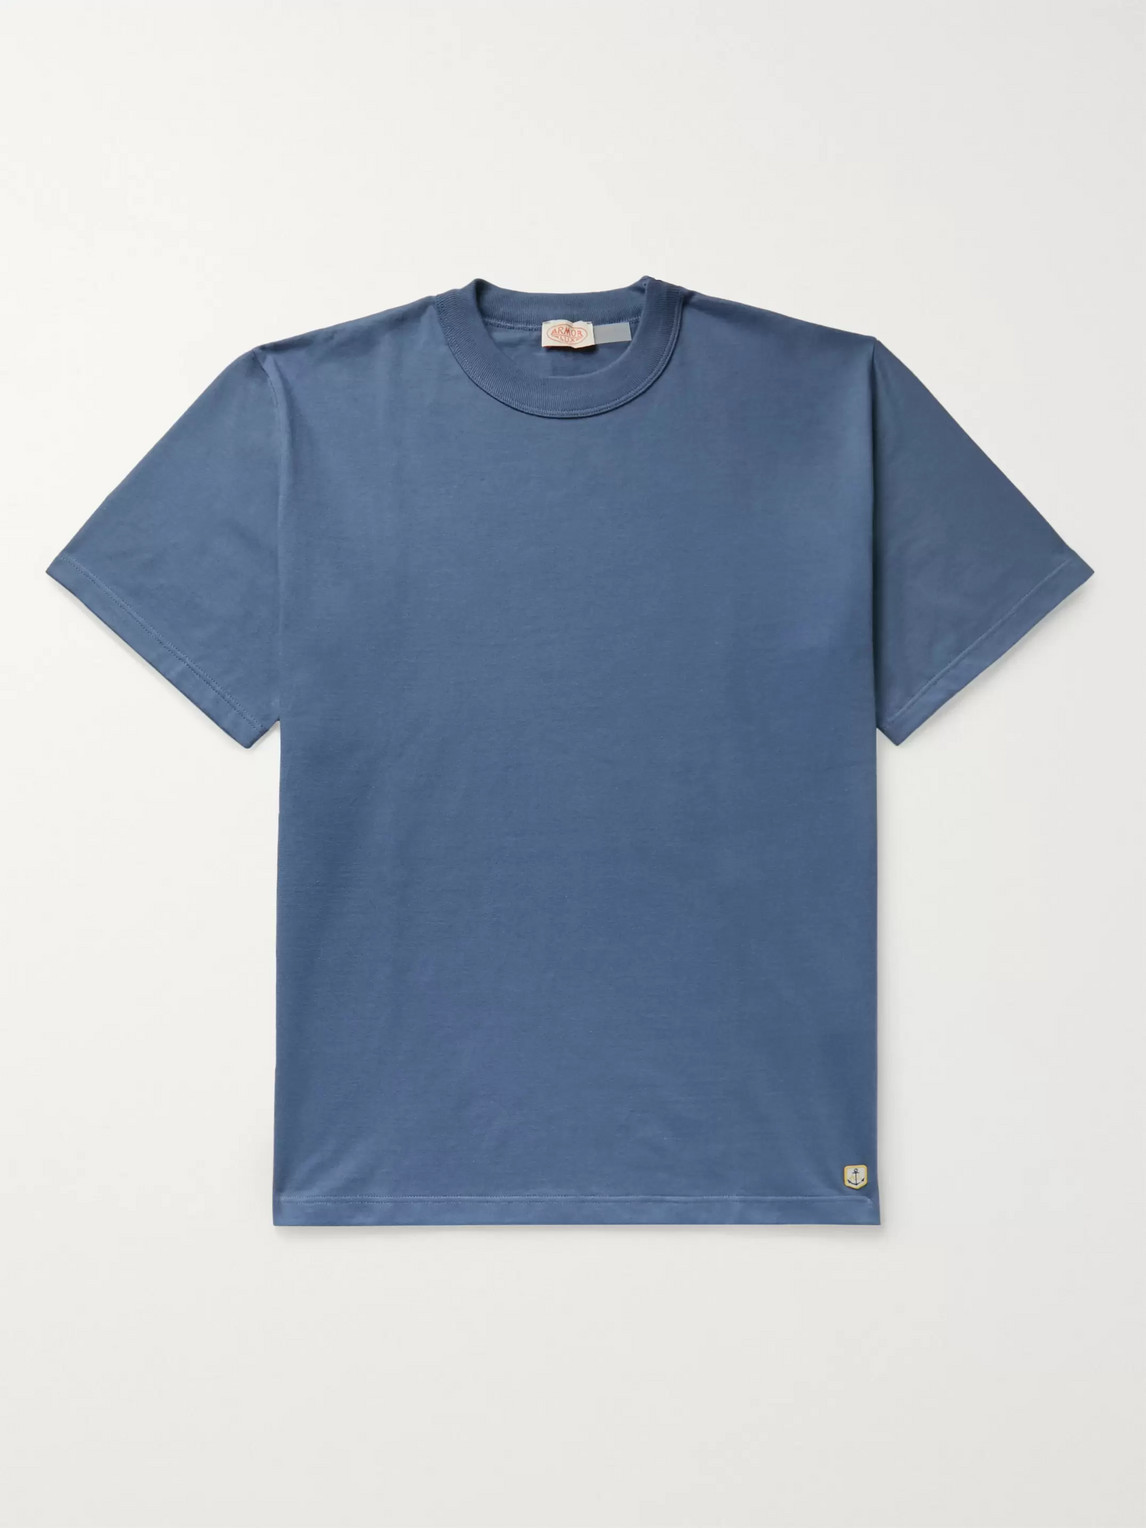 Armor-lux Cotton-jersey T-shirt In Blue